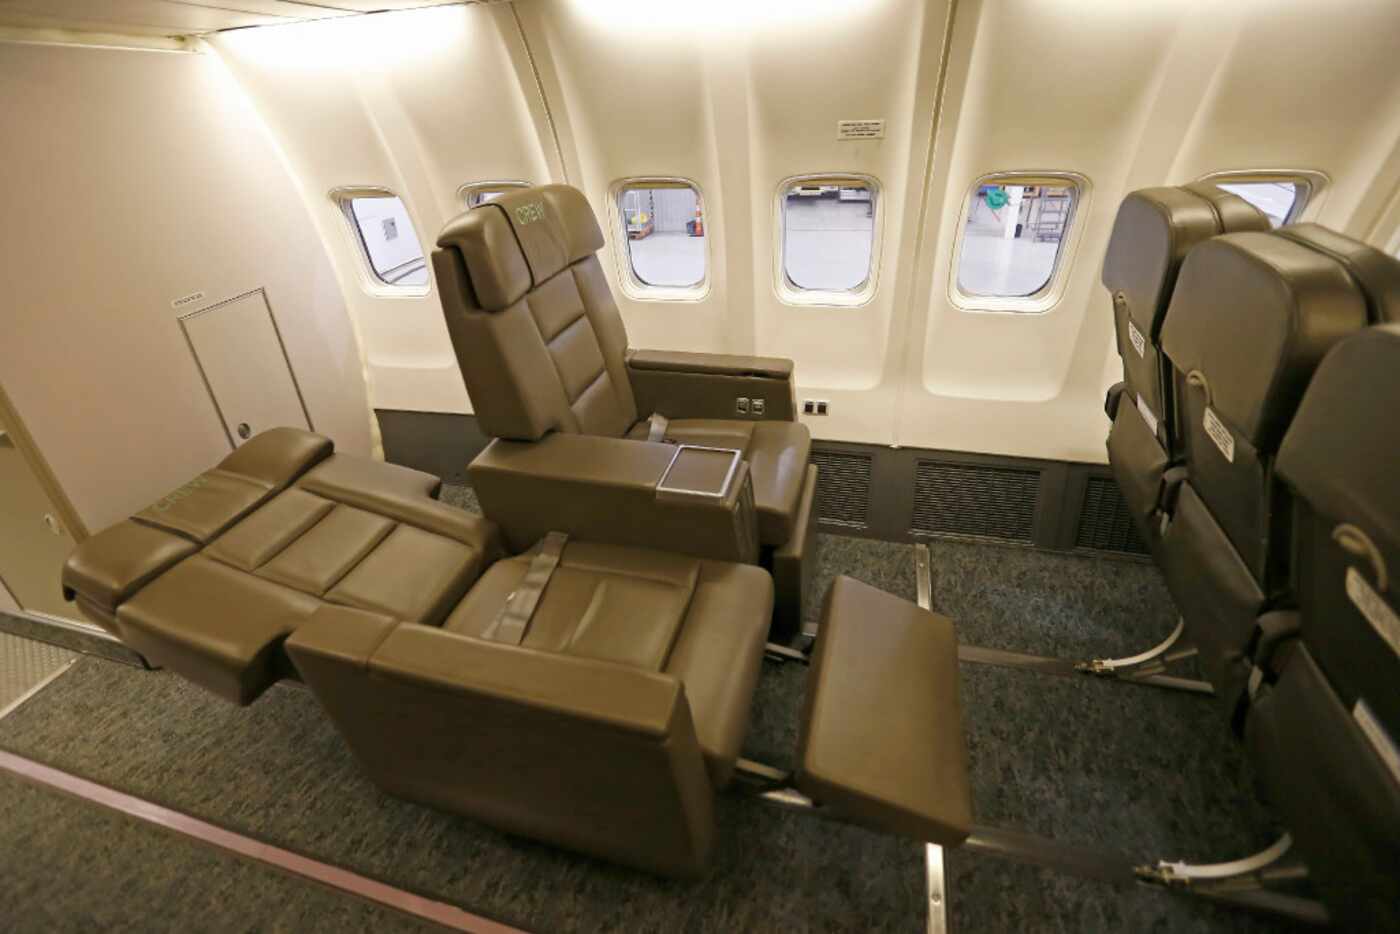 Hillwood's plane sports 34 leather seats with plenty of legroom, a meeting area with tables...